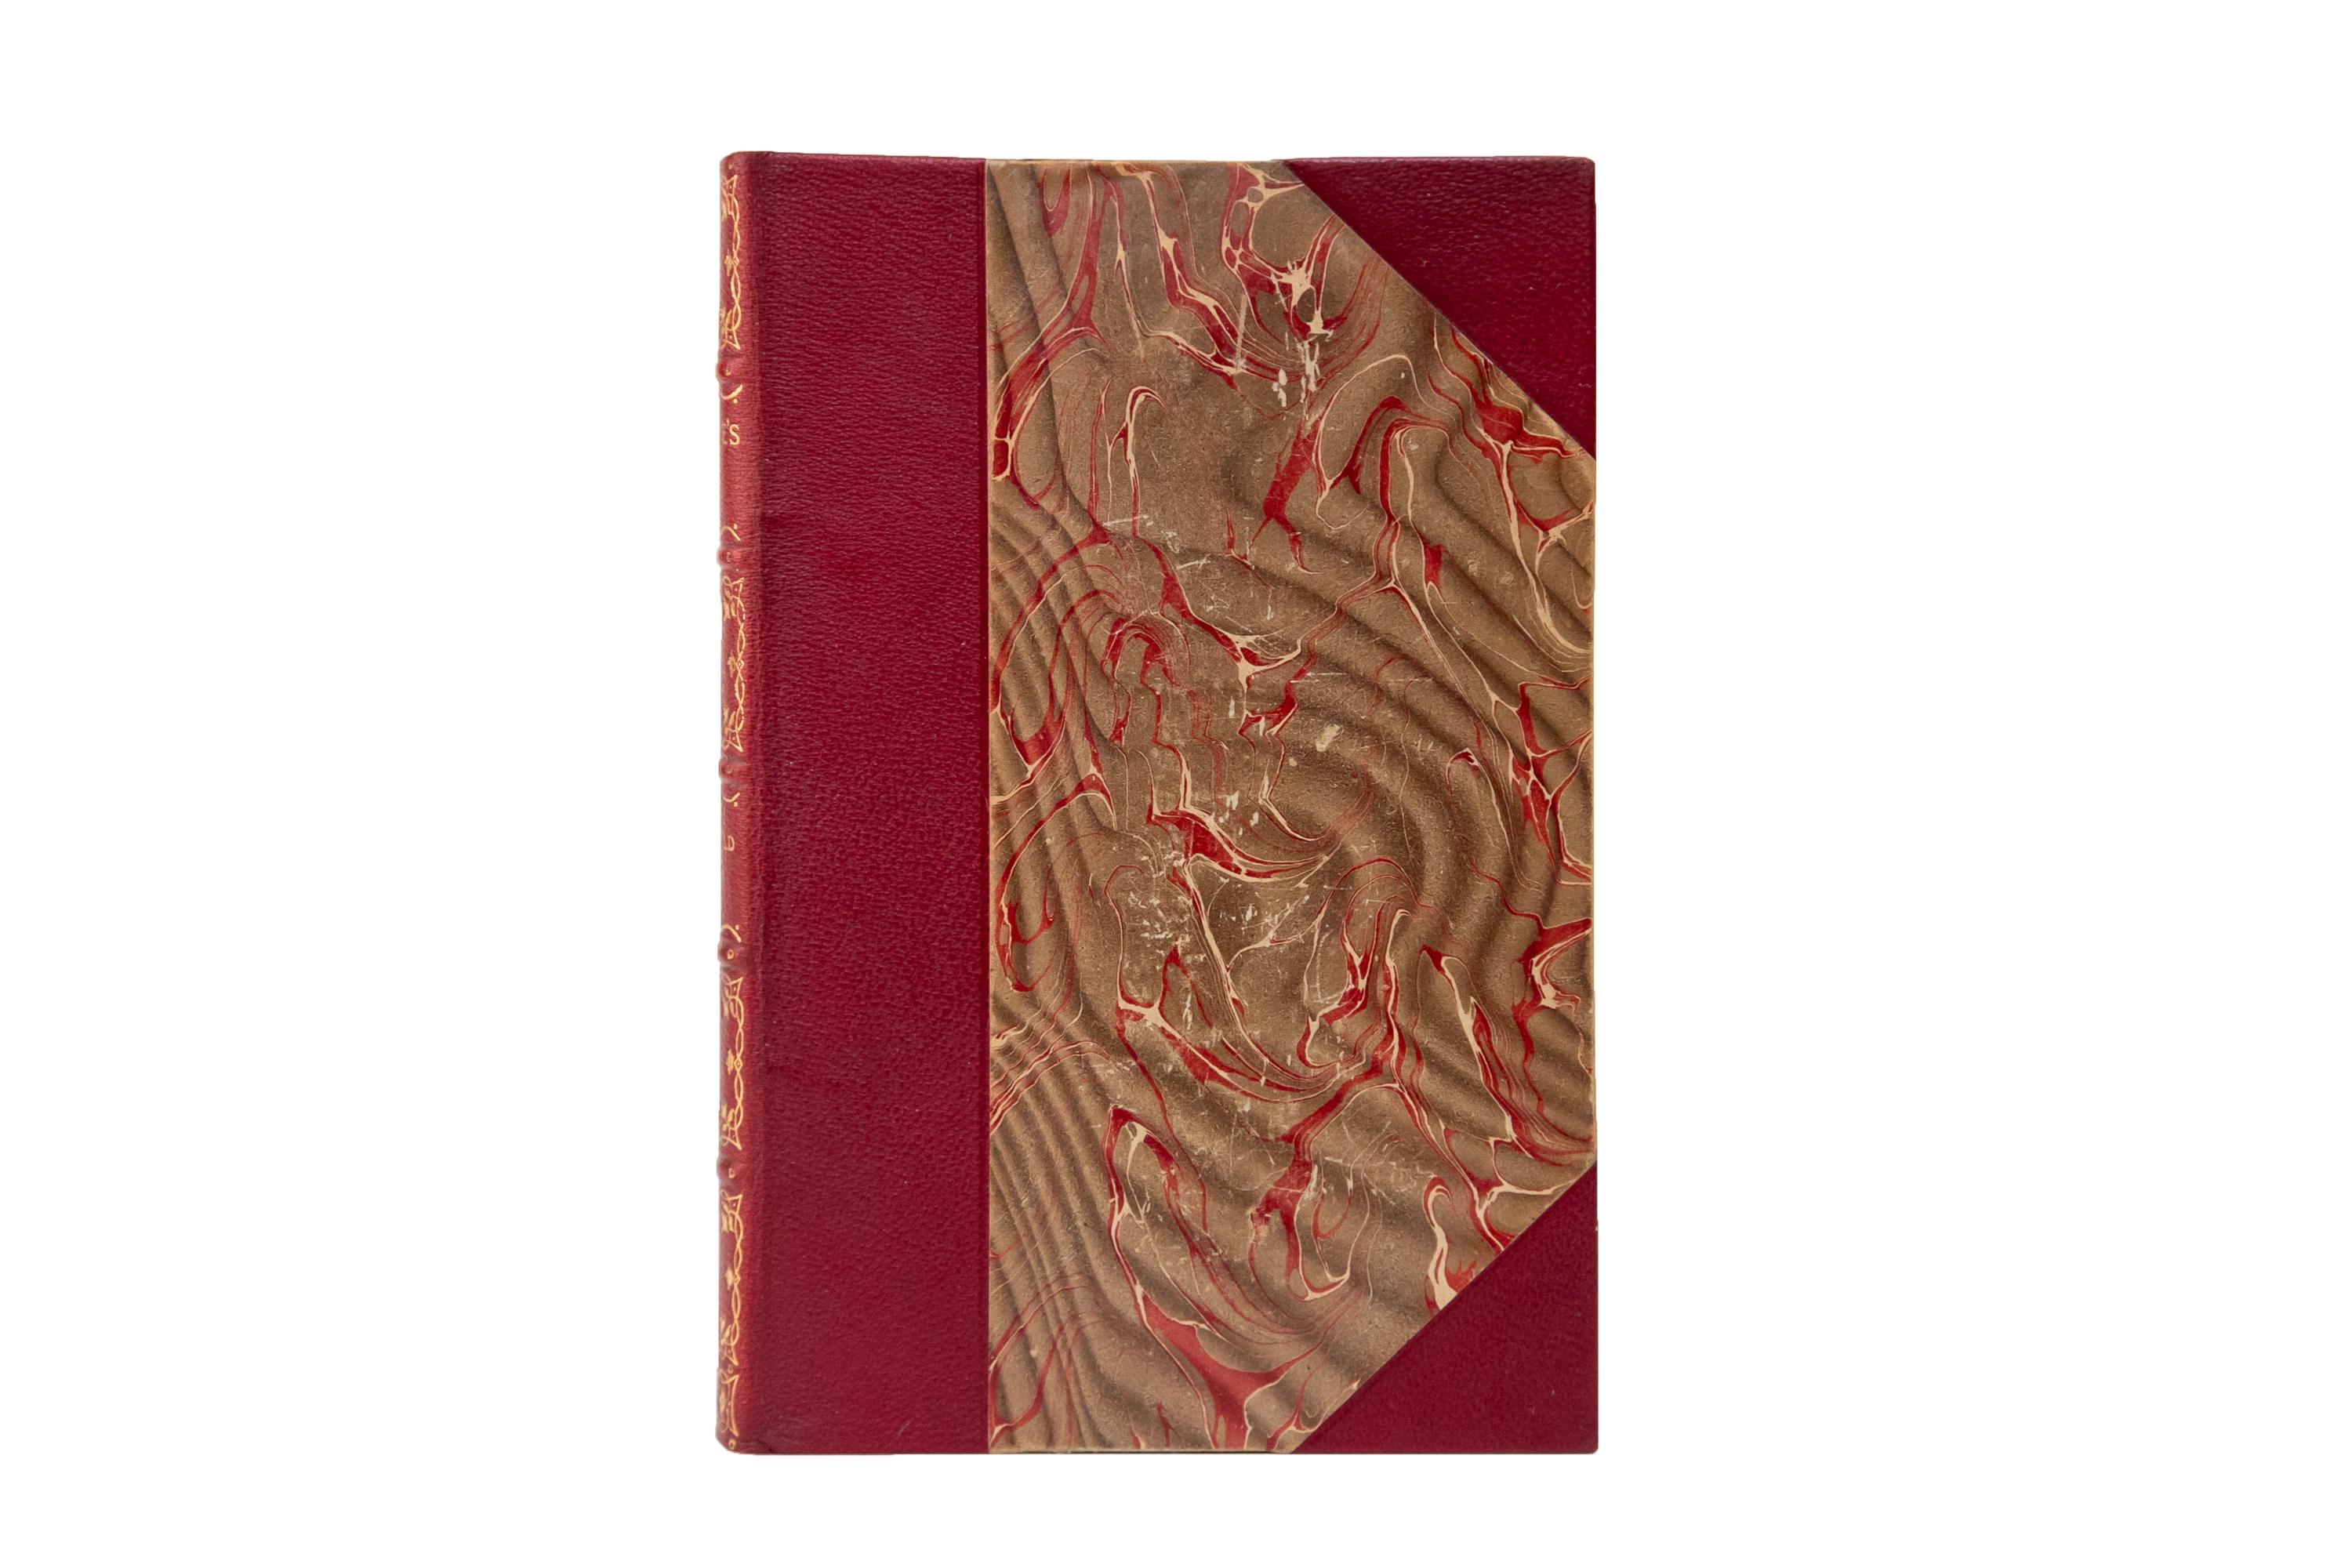 22 Volumes. Nathaniel Hawthorne, The Complete Writings. Bound in 3/4 red morocco and marbled boards. The spines display raised bands, panel details, and label lettering, all gilt-tooled. The top edges are gilded with marbled endpapers. Includes